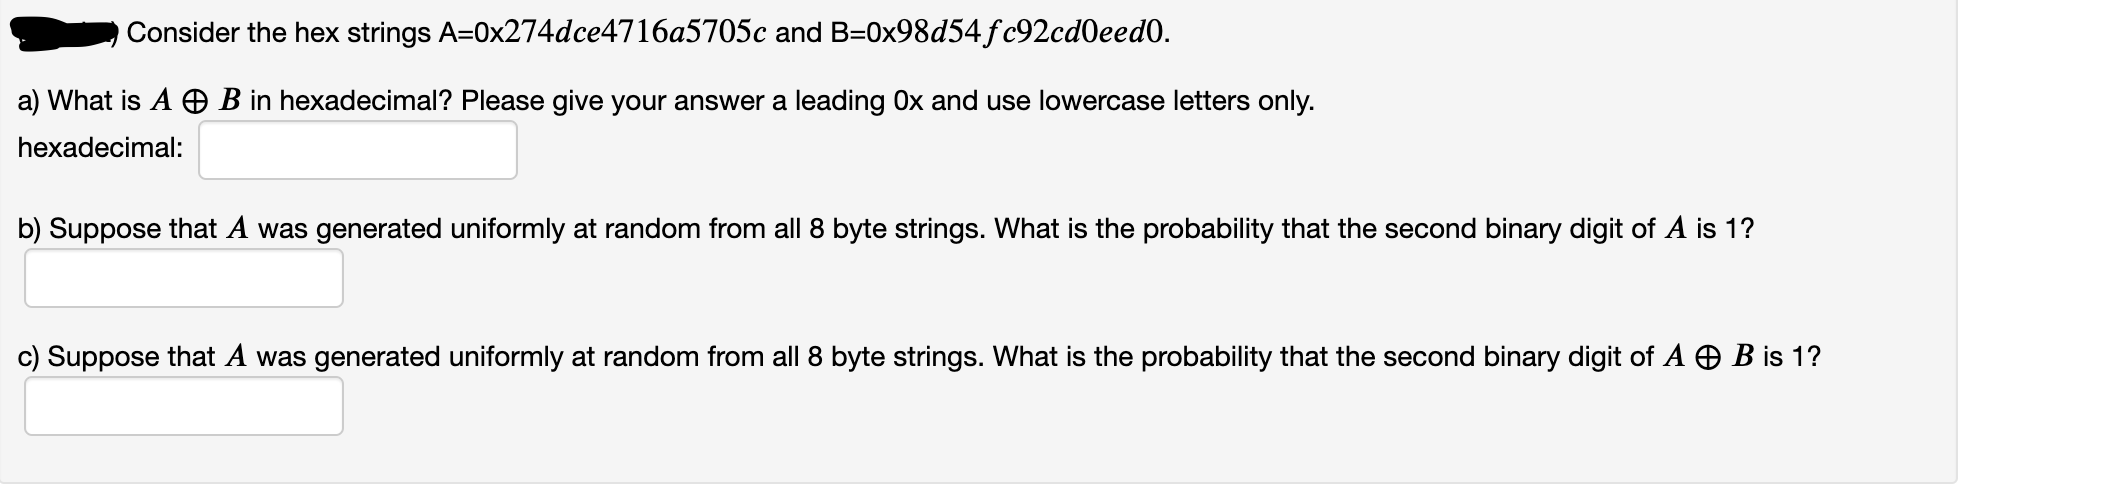 Consider the hex strings A=0x274dce4716a5705c and B=0x98d54fc92cd0eed0.
a) What is A O B in hexadecimal? Please give your answer a leading Ox and use lowercase letters only.
hexadecimal:
b) Suppose that A was generated uniformly at random from all 8 byte strings. What is the probability that the second binary digit of A is 1?
c) Suppose that A was generated uniformly at random from all 8 byte strings. What is the probability that the second binary digit of A O B is 1?
